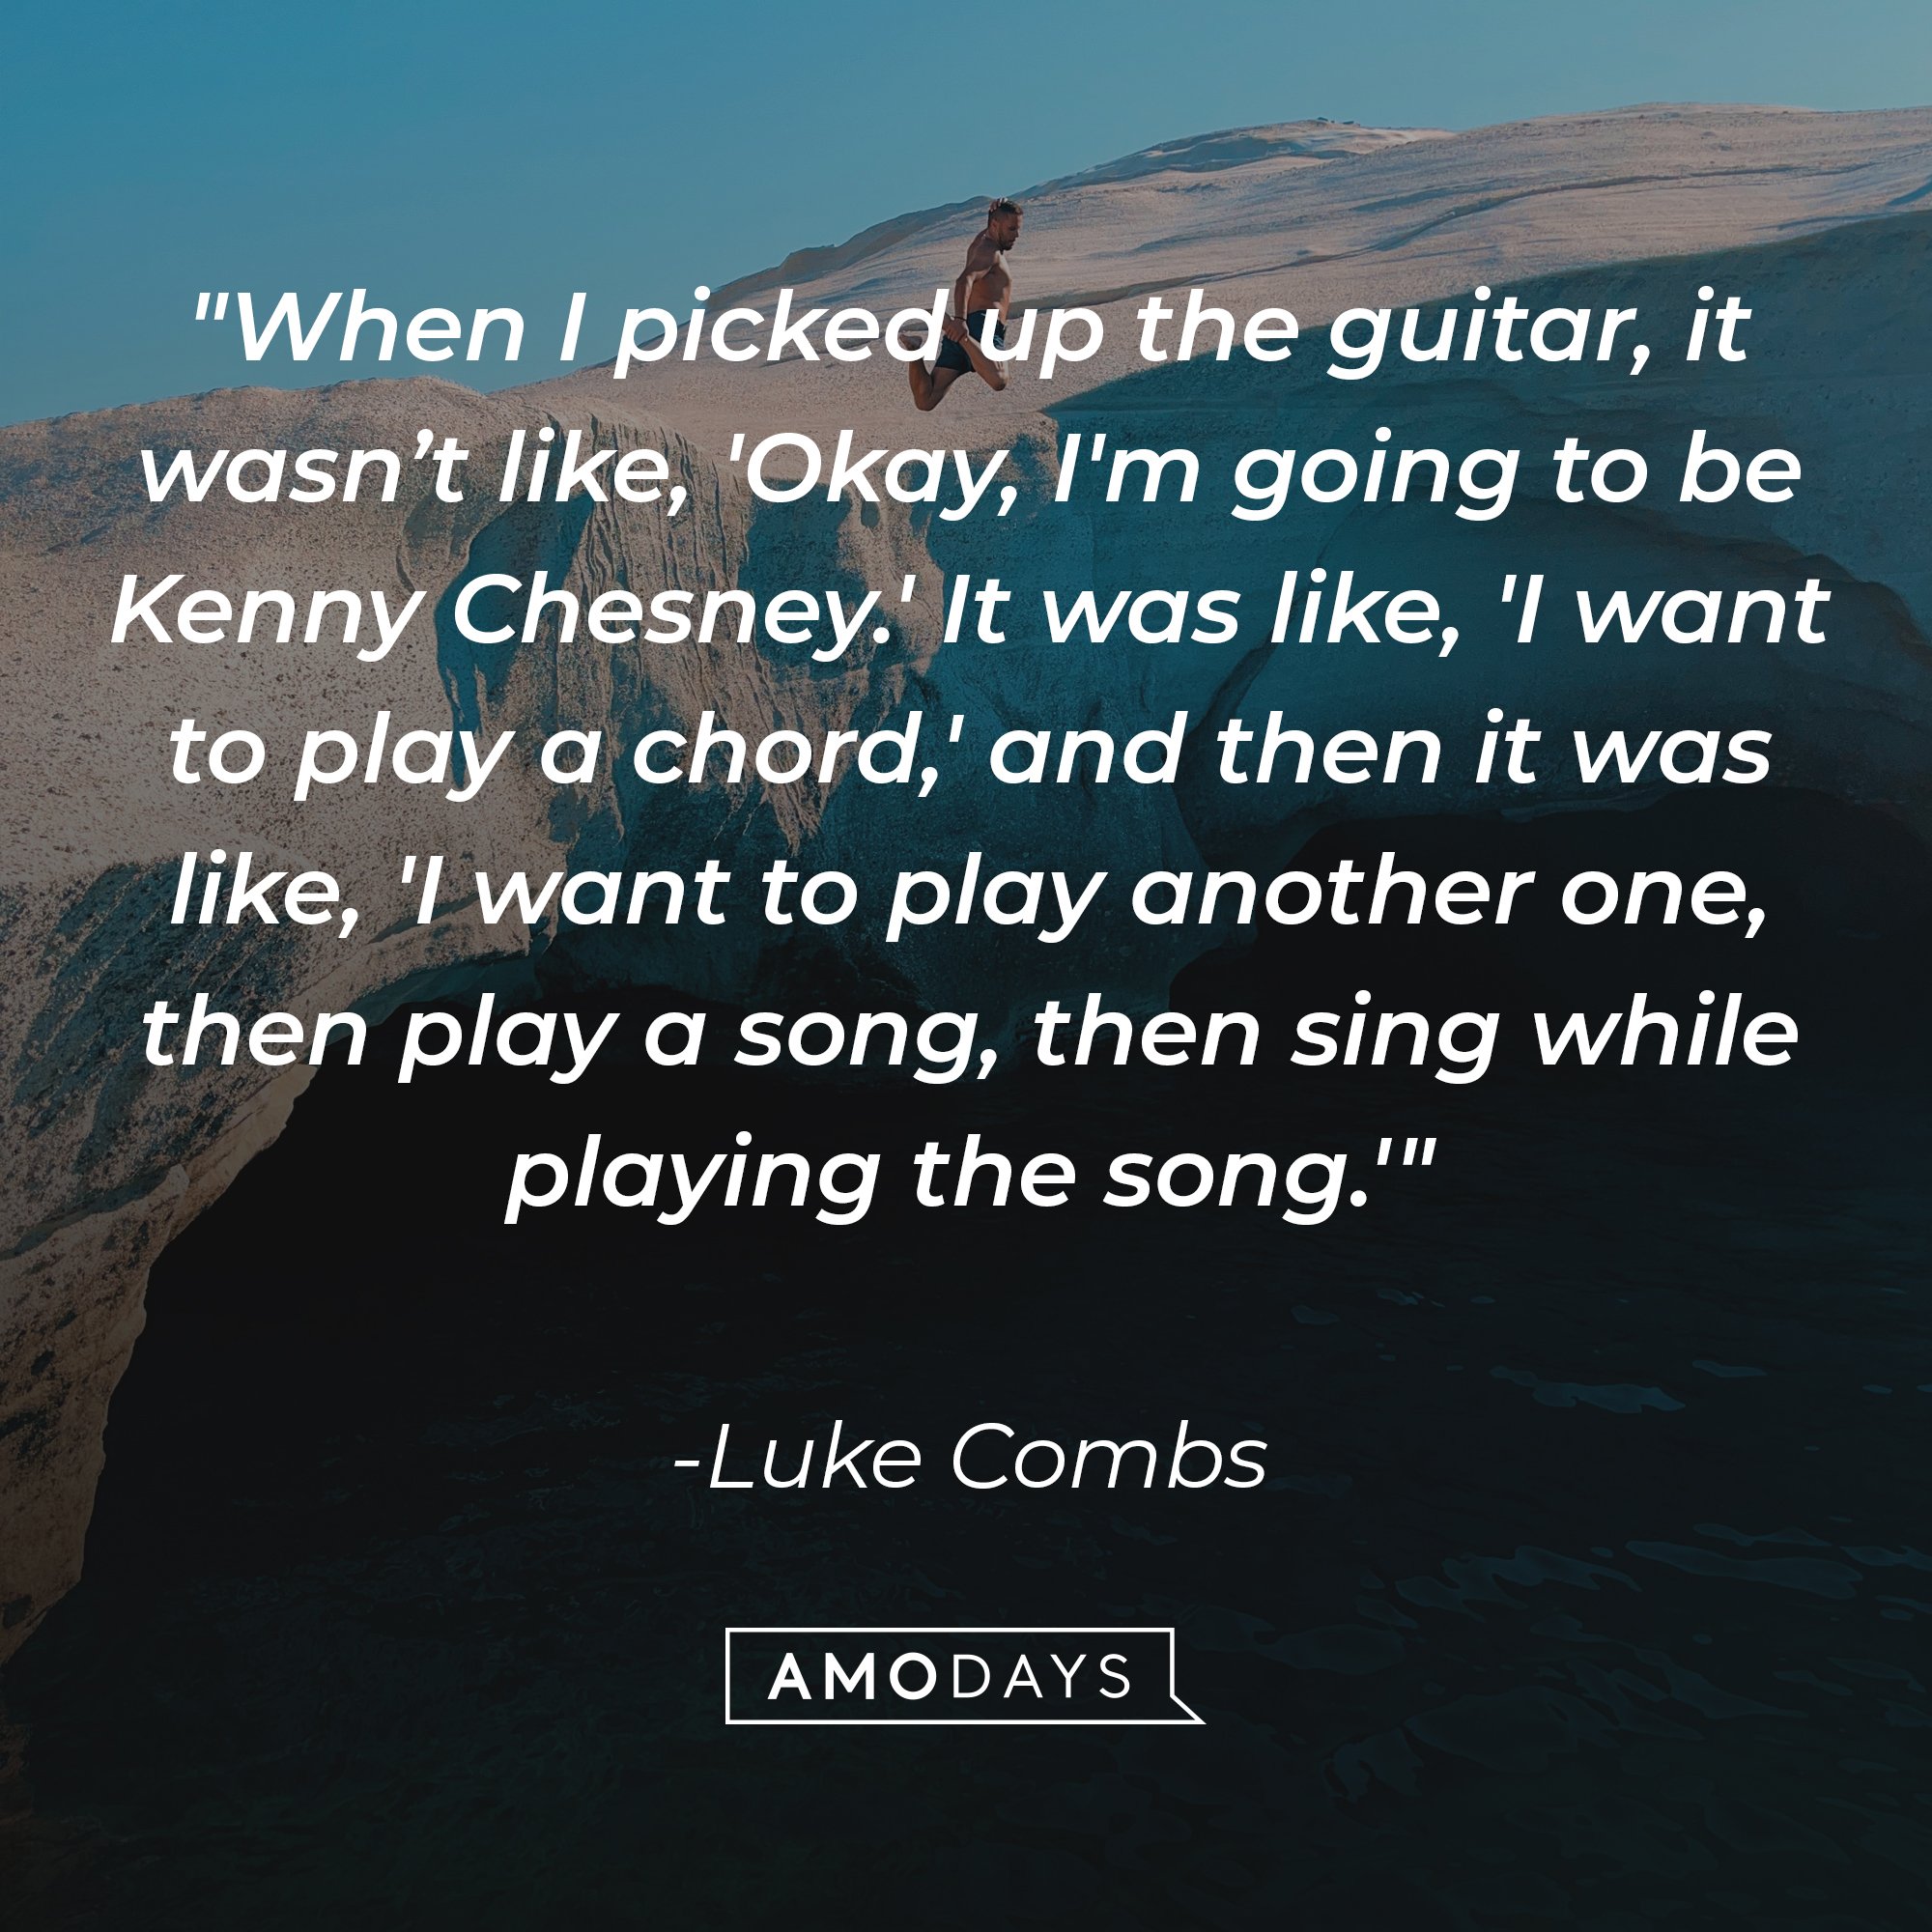 Luke Combs's quote "When I picked up the guitar, it wasn’t like, 'Okay, I'm going to be Kenny Chesney.' It was like, 'I want to play a chord,' and then it was like, 'I want to play another one, then play a song, then sing while playing the song.'" | Source: Unsplash